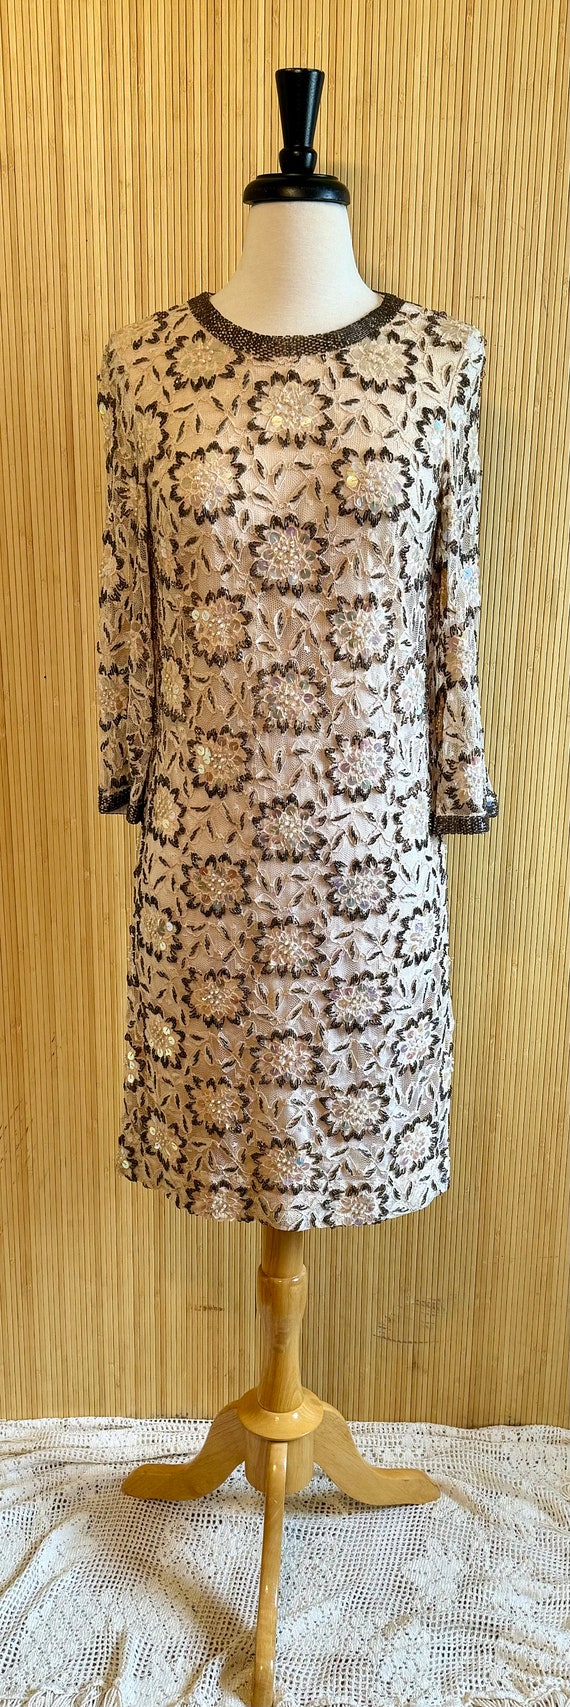 1960’s Lace/Beads/Sequins Shift Dress - image 2